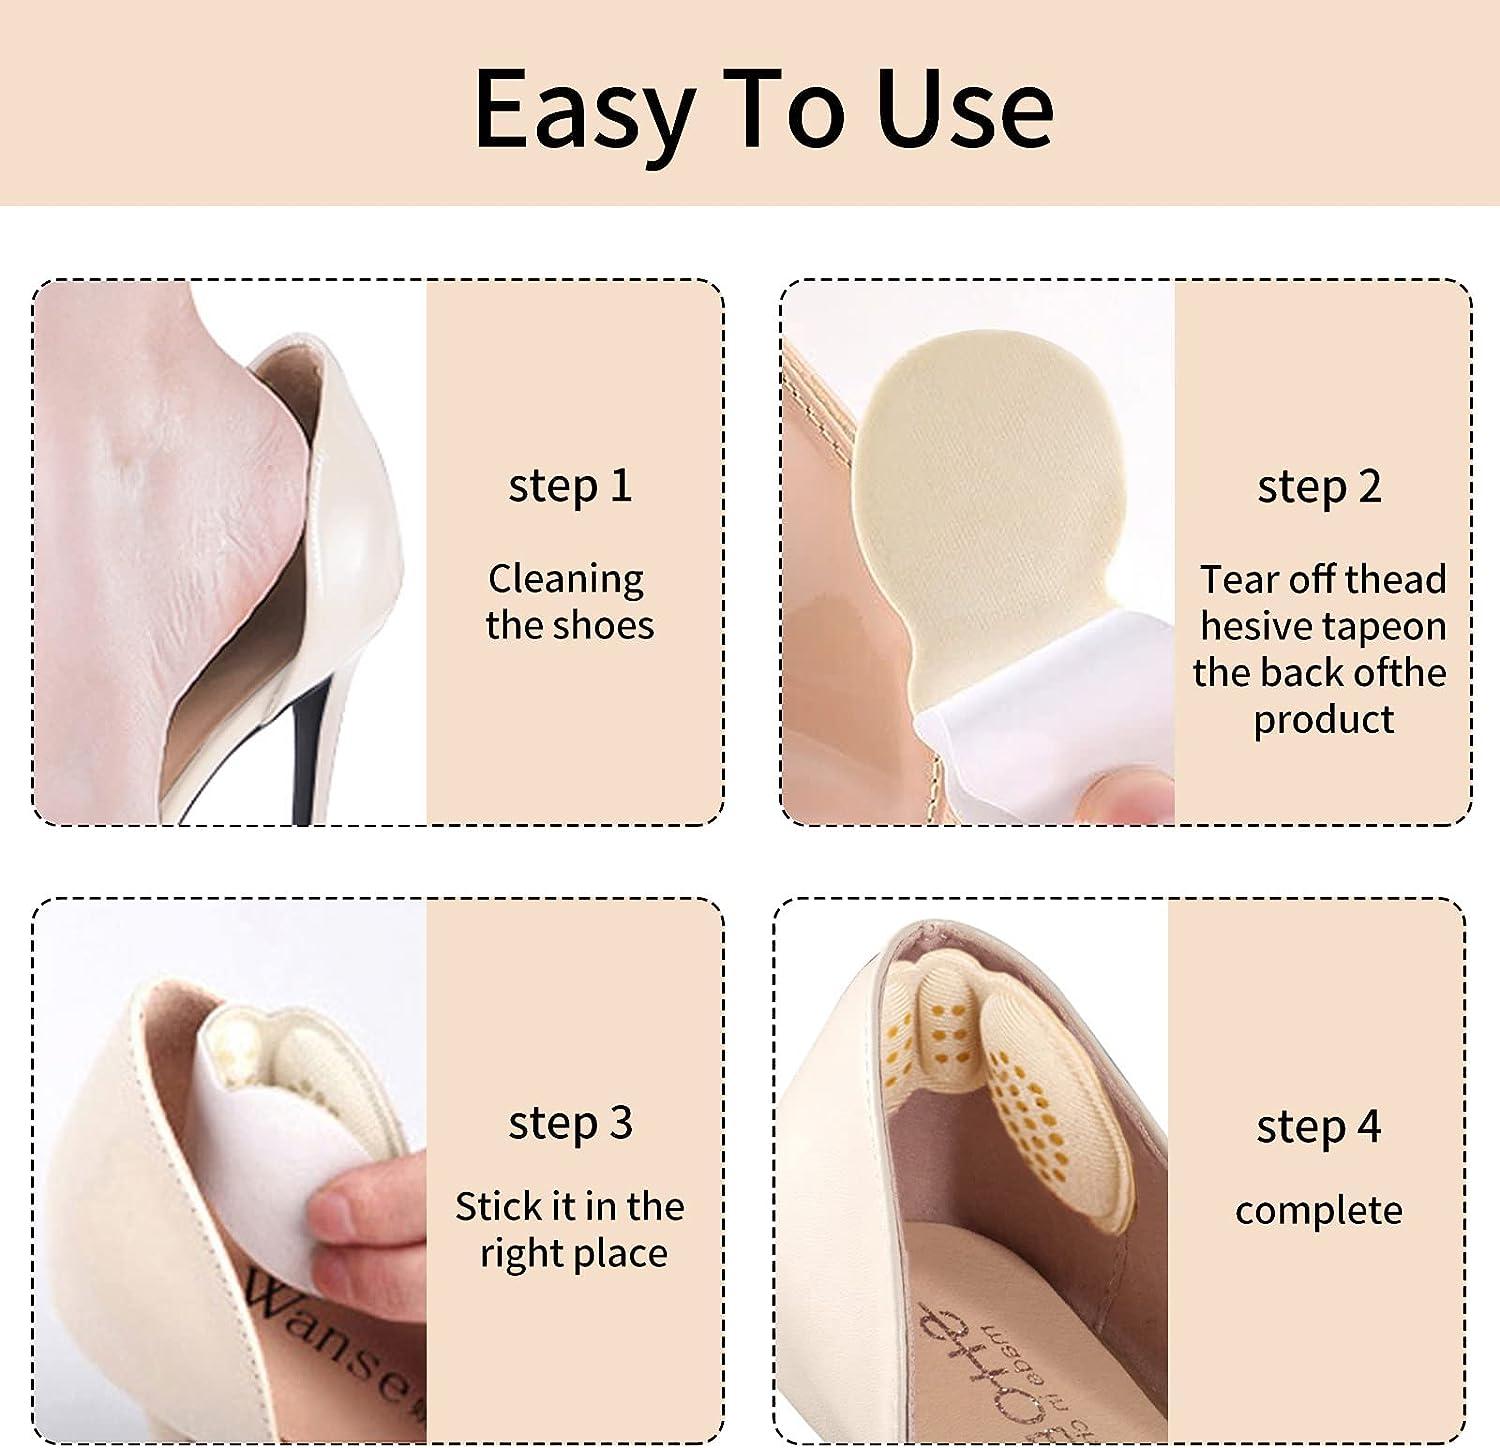 5 Pairs Heel Grips Pads Liner Cushions Self-adhesive for Loose Shoes Extra  Thick | eBay